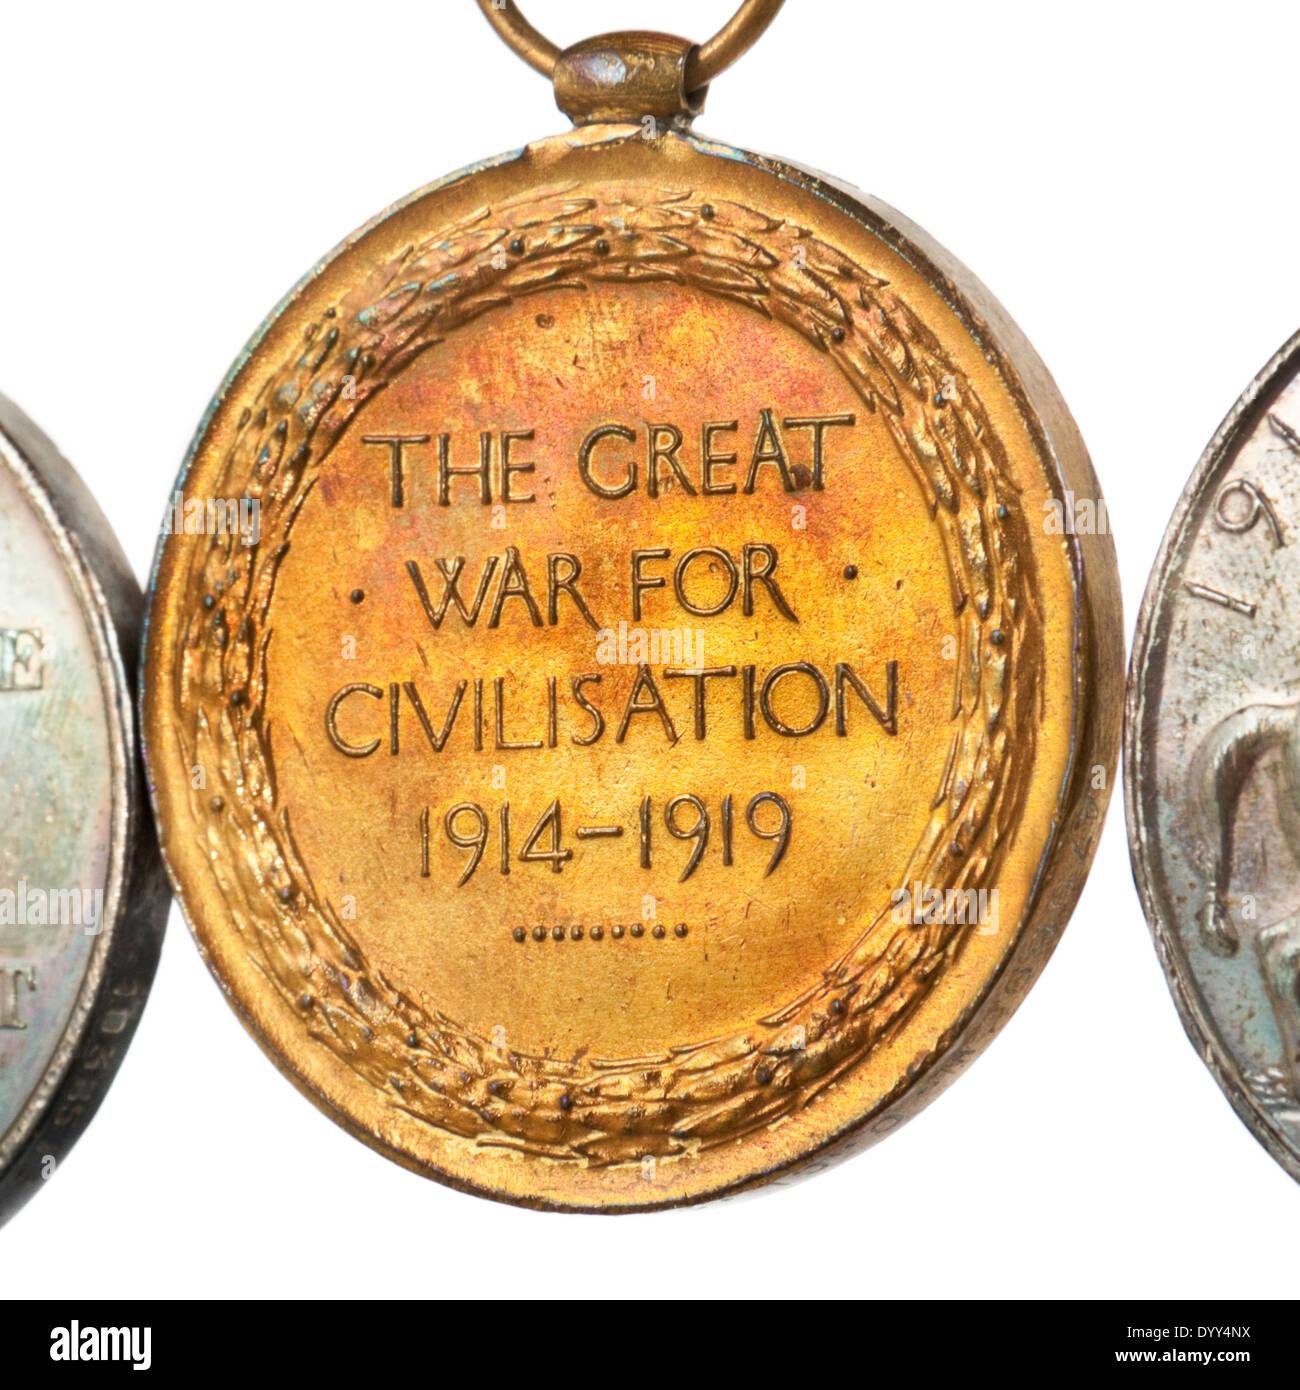 British Empire WW1 Victory Medal 'The Great War for Civilisation 1914-1919' (Reverse side). Stock Photo